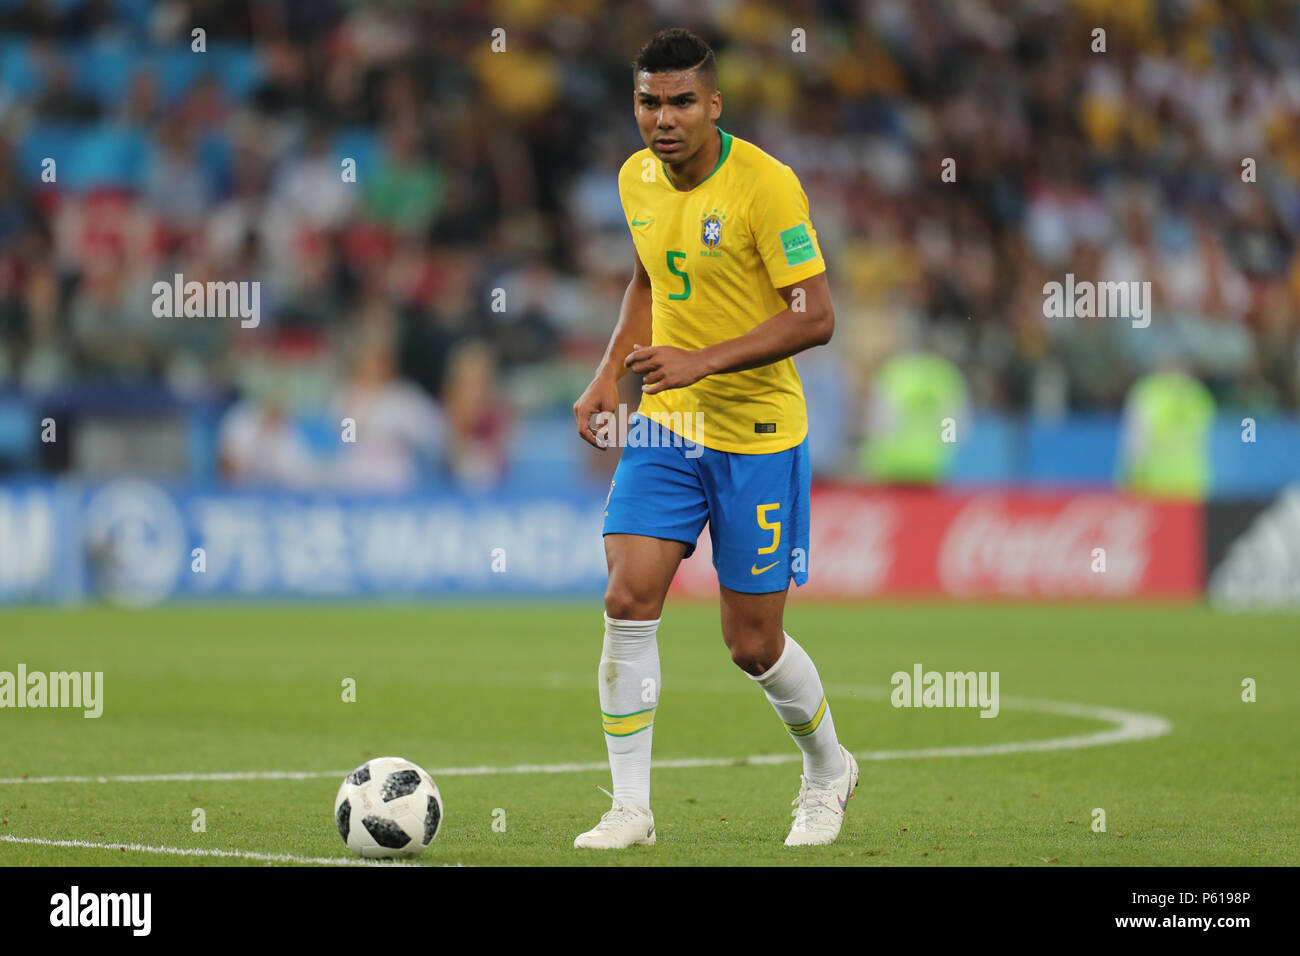 Casemiro  BRAZIL  SERBIA V BRAZIL , 2018 FIFA WORLD CUP RUSSIA  27 June 2018  GBC8993  Serbia v Brazil  2018 FIFA World Cup Russia Spartak Stadium Moscow    STRICTLY EDITORIAL USE ONLY.   If The Player/Players Depicted In This Image Is/Are Playing For An English Club Or The England National Team.   Then This Image May Only Be Used For Editorial Purposes. No Commercial Use.    The Following Usages Are Also Restricted EVEN IF IN AN EDITORIAL CONTEXT:   Use in conjuction with, or part of, any unauthorized audio, video, data, fixture lists, club/league logos, Betting, Games or any 'live' services. Stock Photo